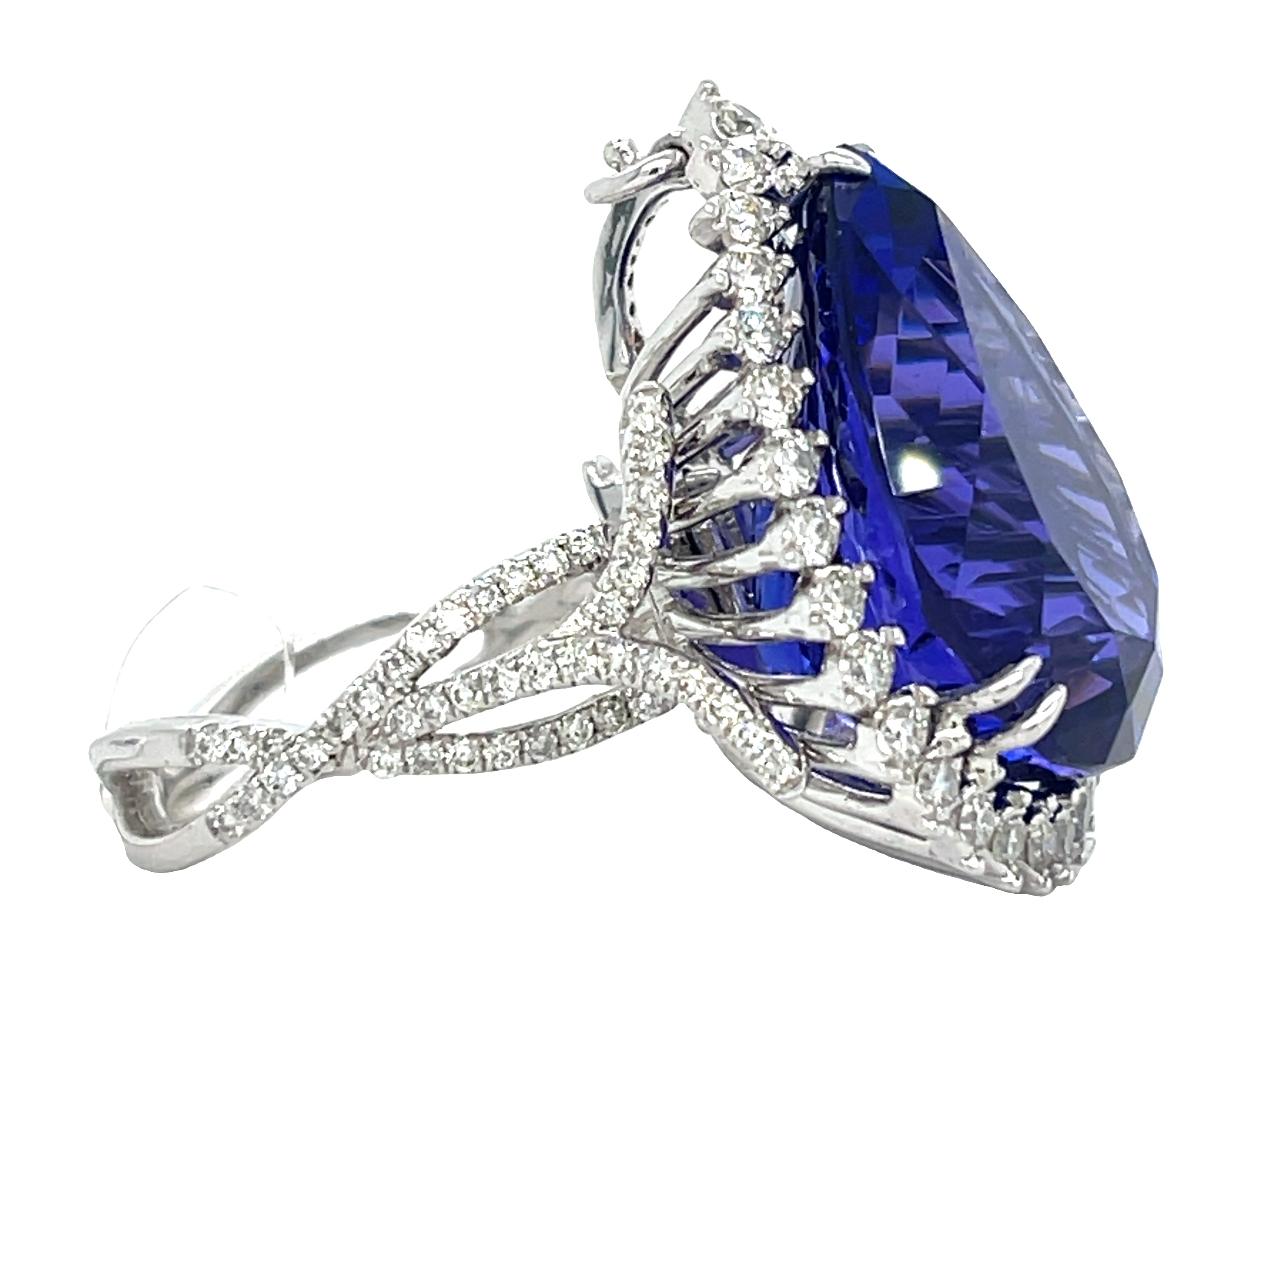 22 ct AAA Tanzanite and Diamond Ring in 18K White Gold In New Condition For Sale In New York, NY